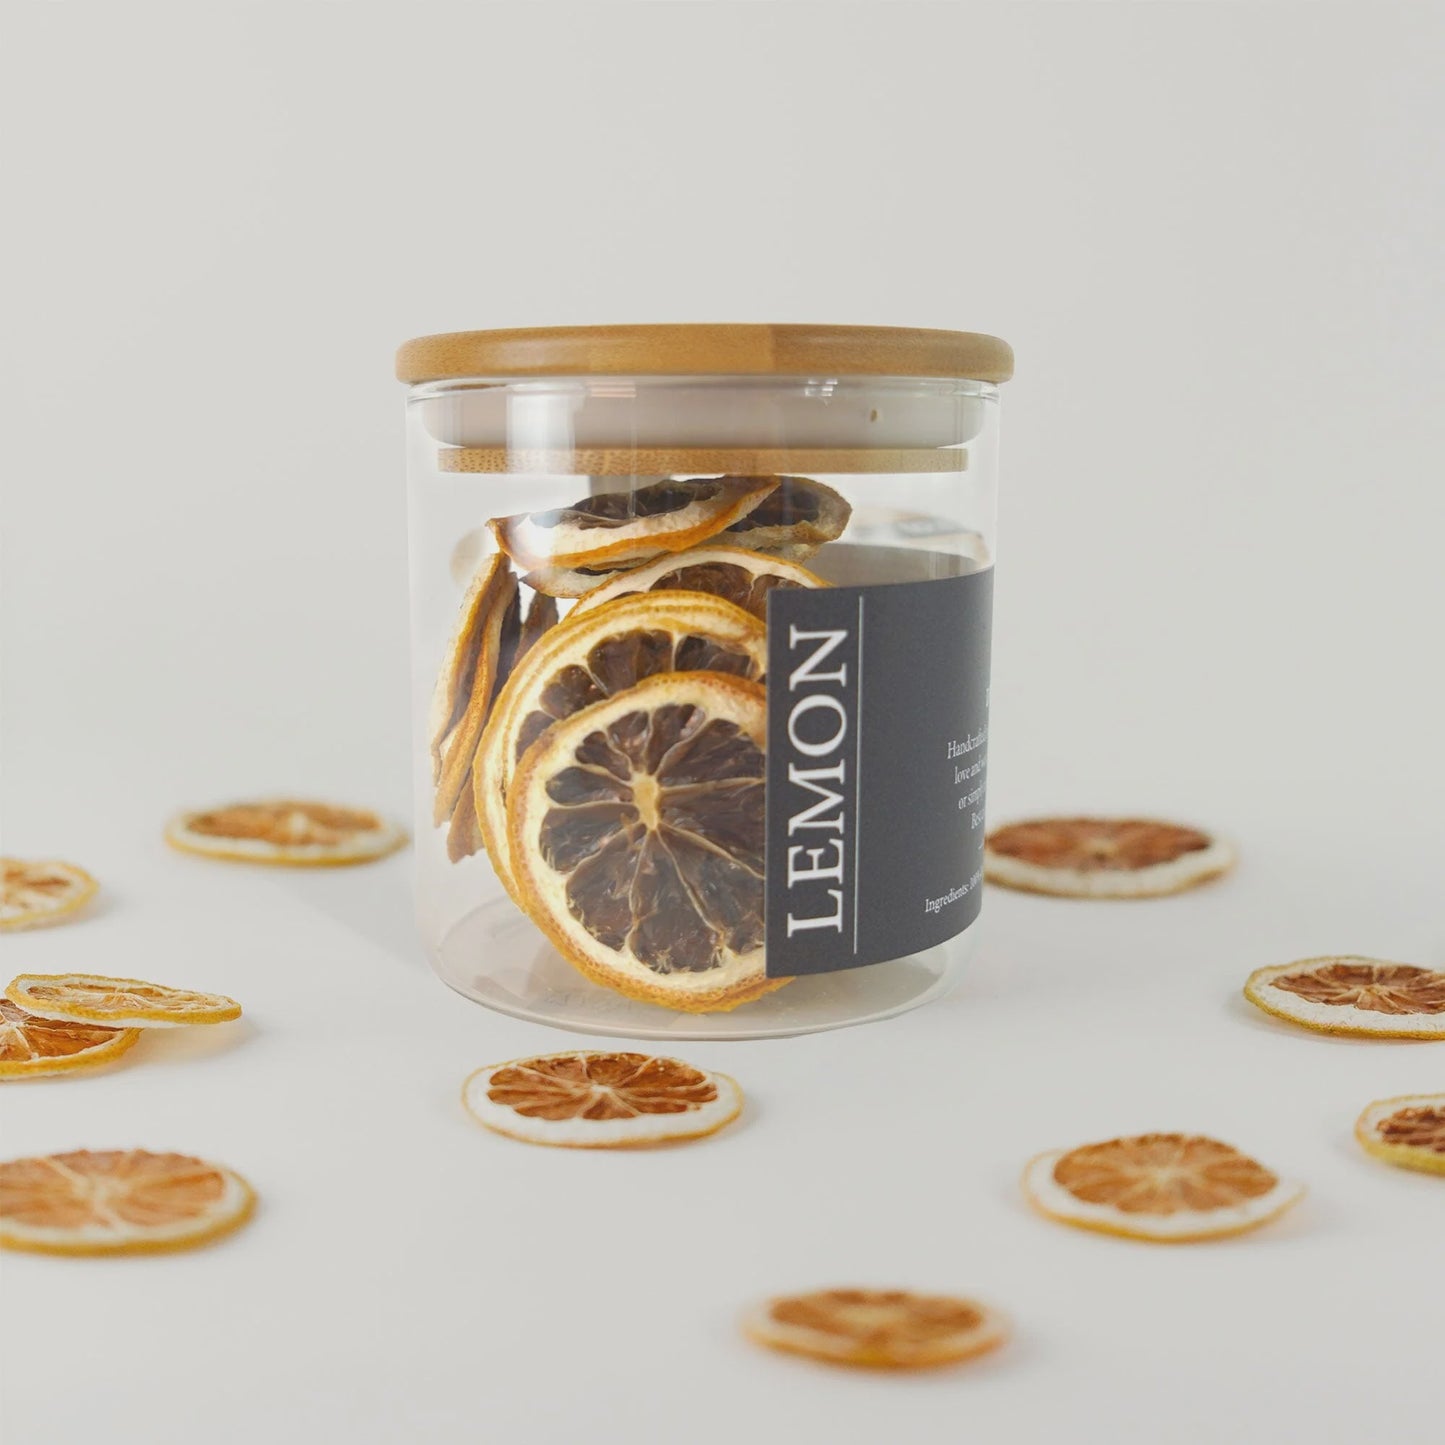 Add a zesty twist to your cocktails with these dehydrated lemon slices! With 50g of dried lemons, it's the perfect tangy garnish for every drink you can dream up. Get ready to dazzle your guests with a whole jar full of citrusy vibes!